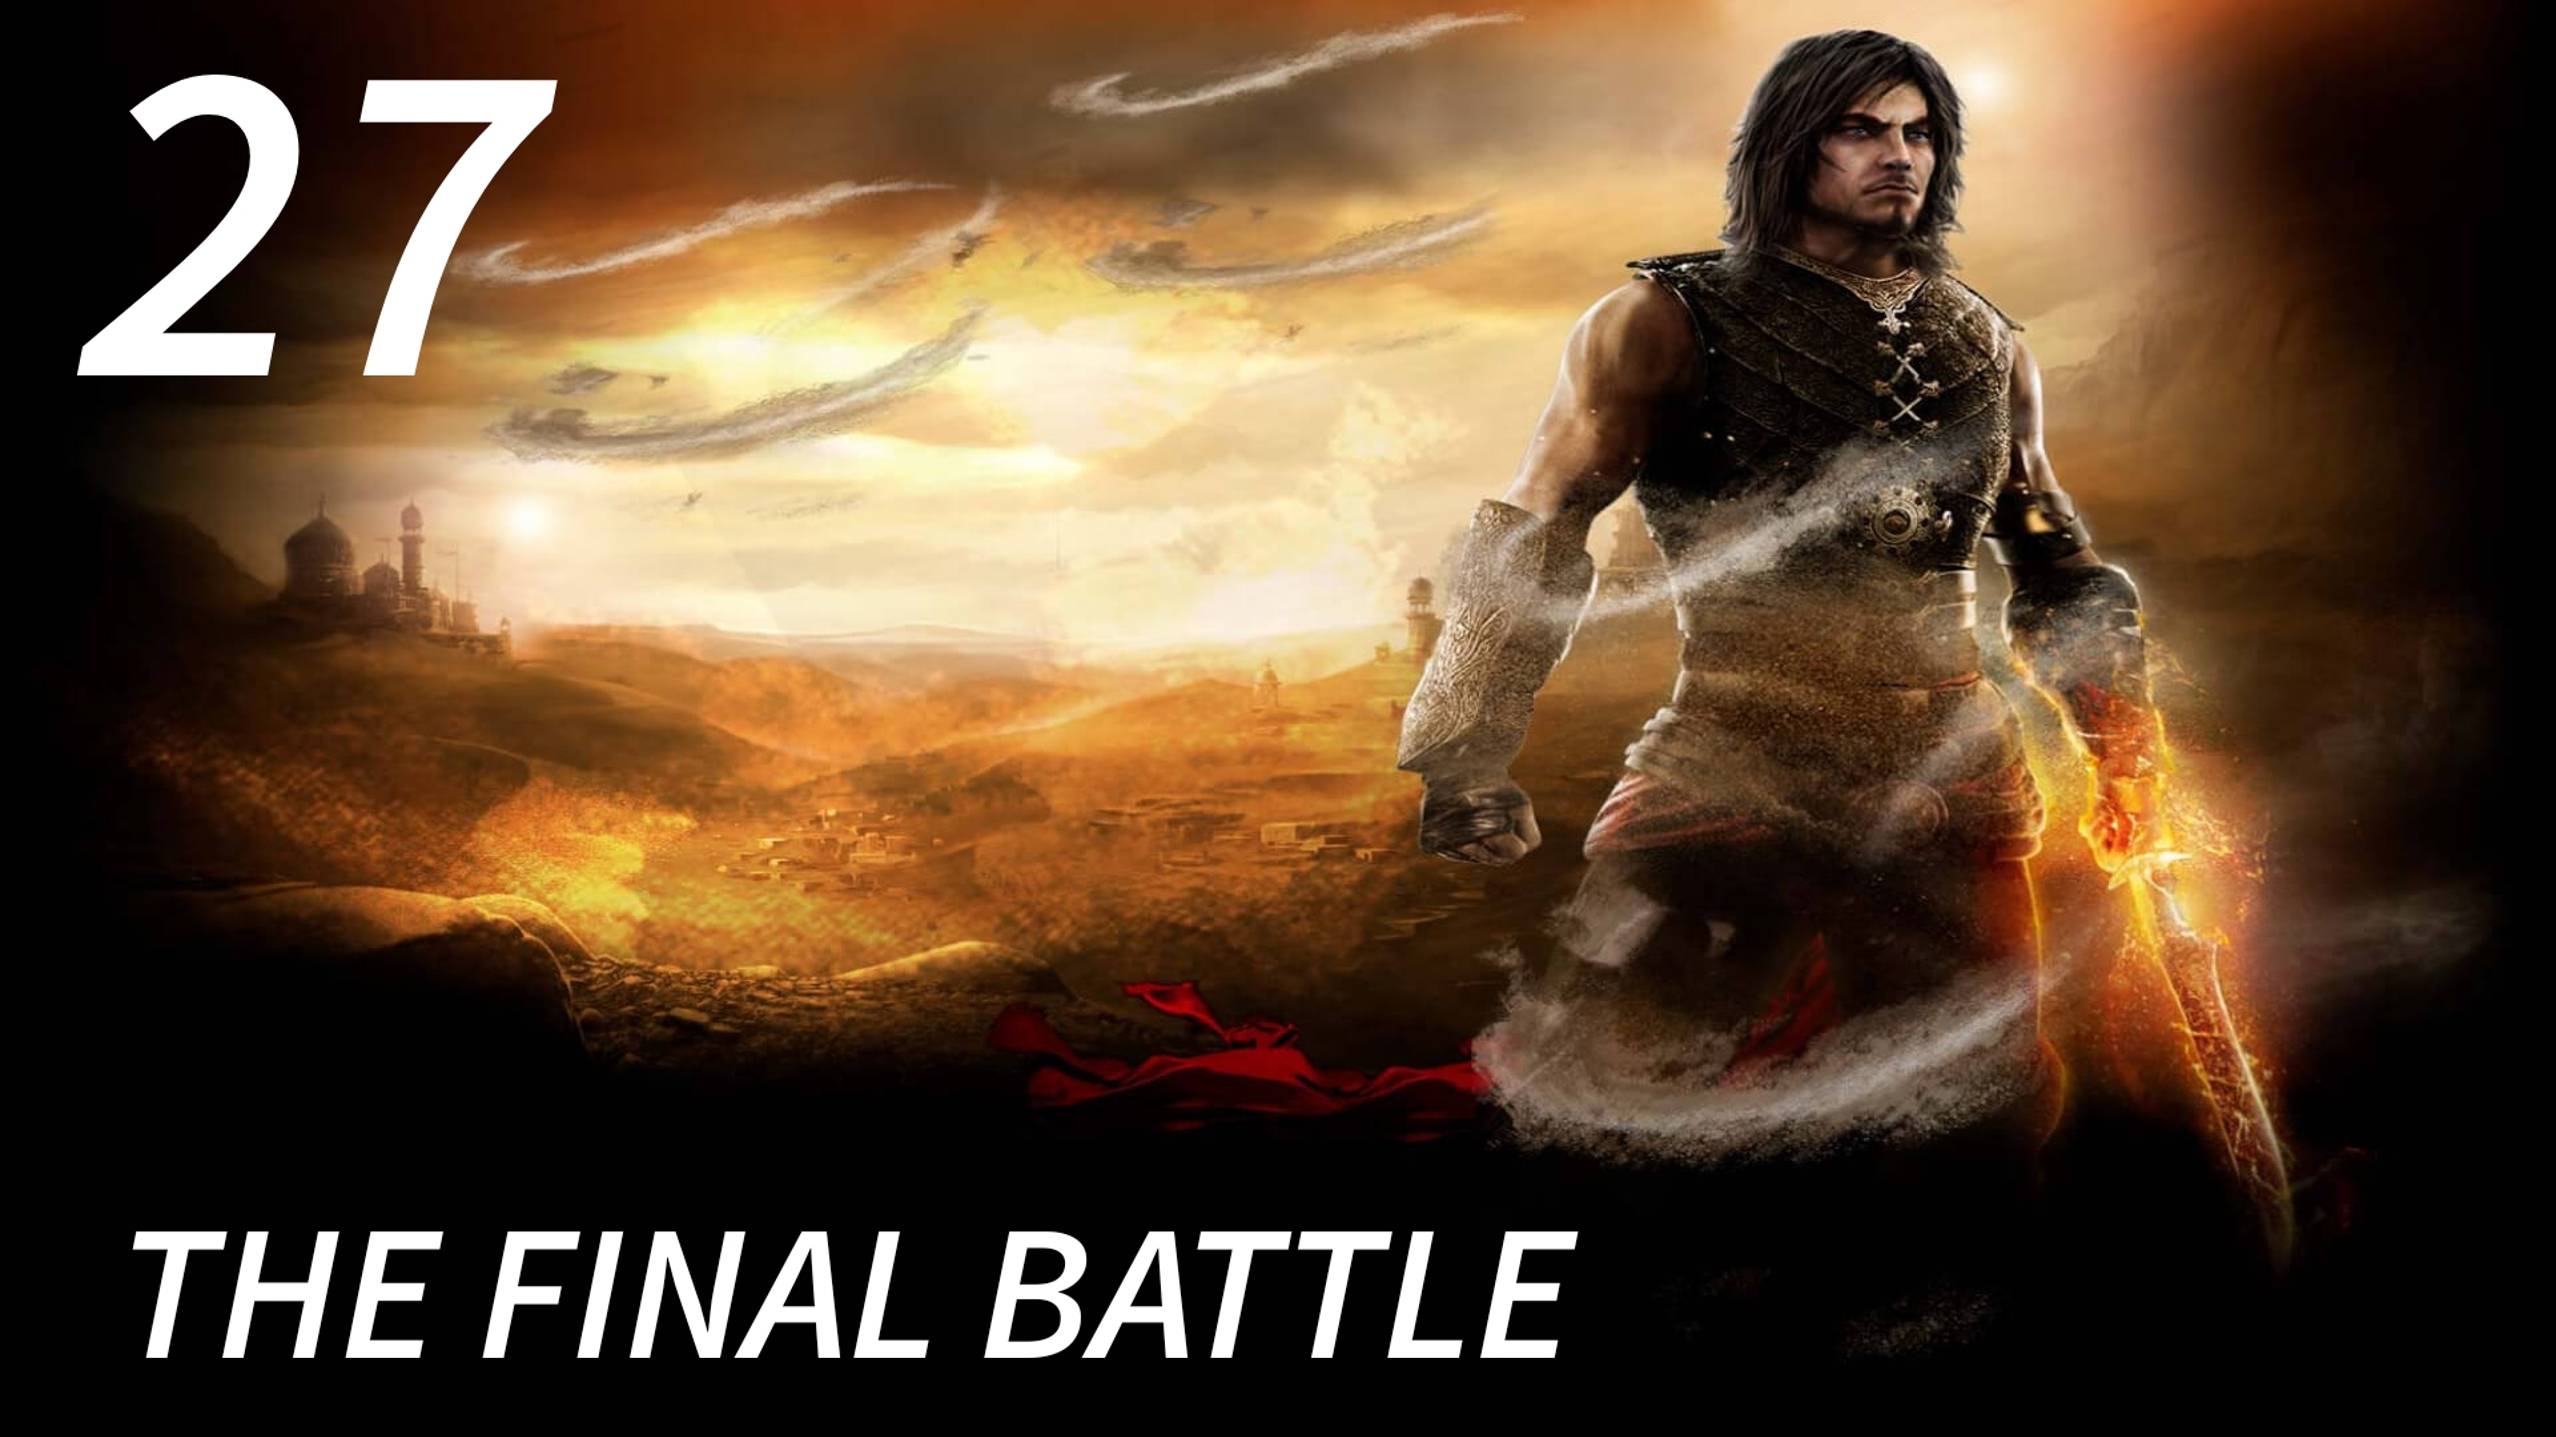 Prince of Persia: The Forgotten Sands / The Final Battle